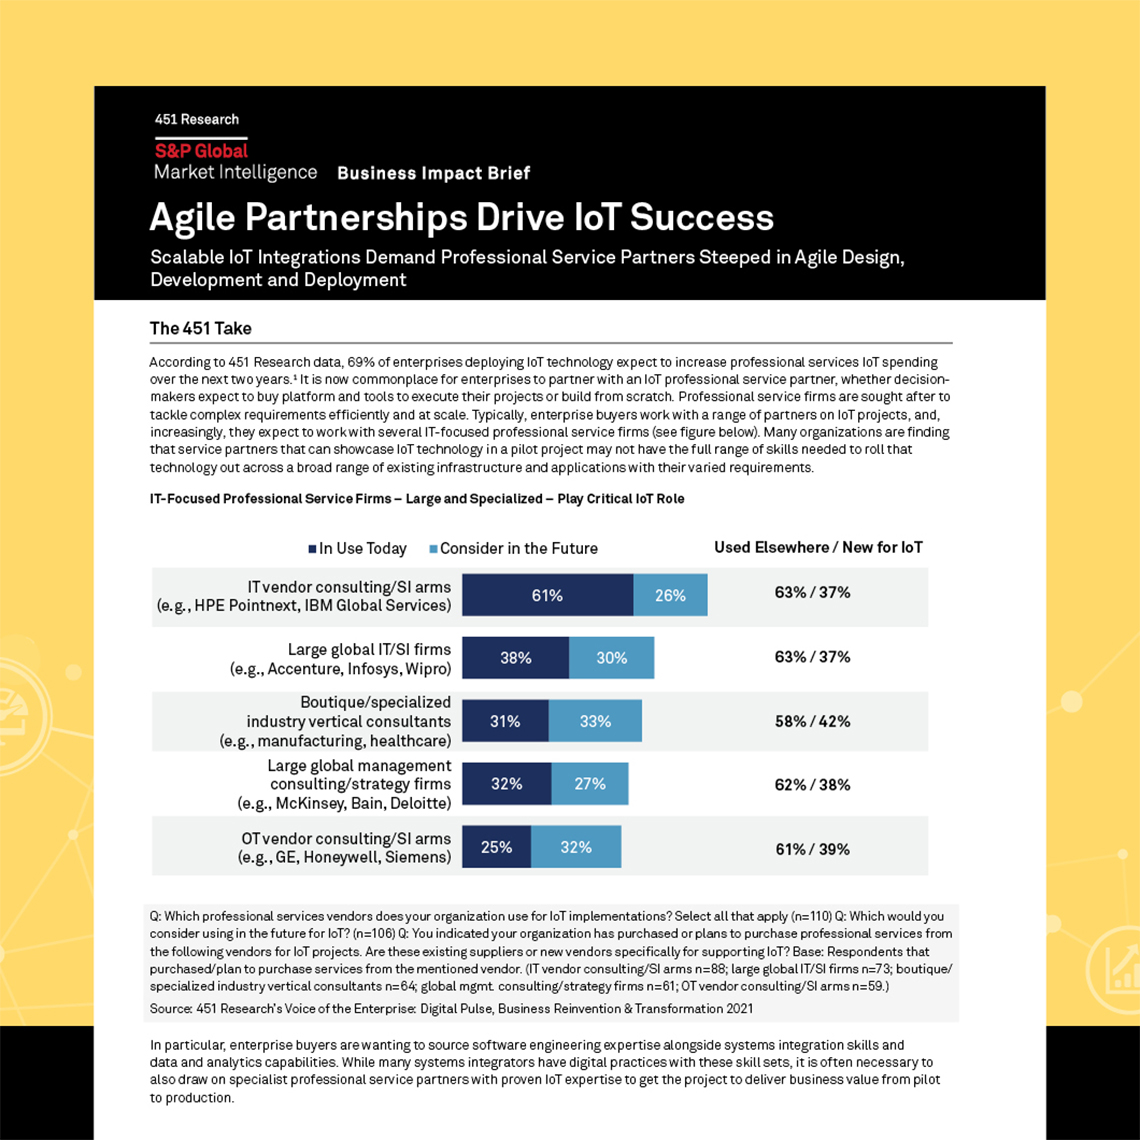 Agile partnerships drive IoT success - a business impact brief by 451 Research